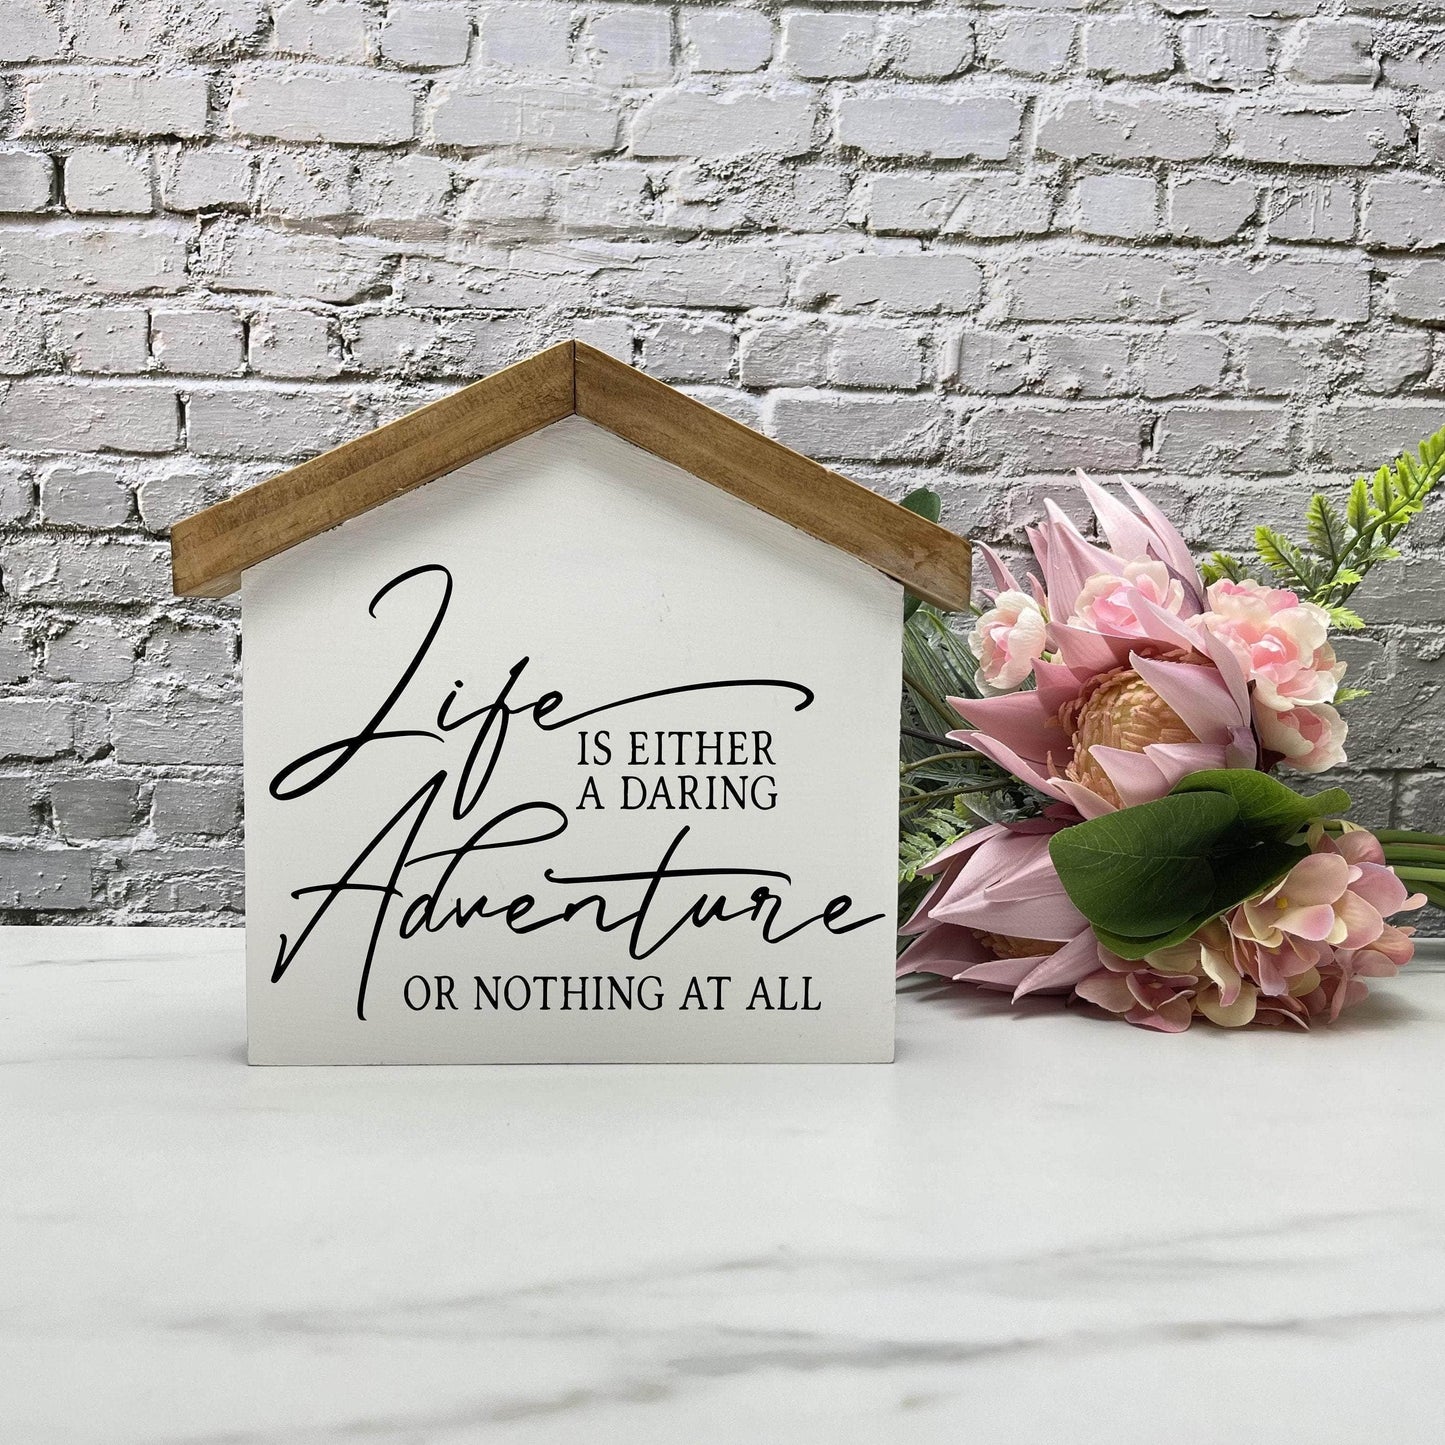 Life is an adventure  wood sign, quote sign, rustic decor, home decor